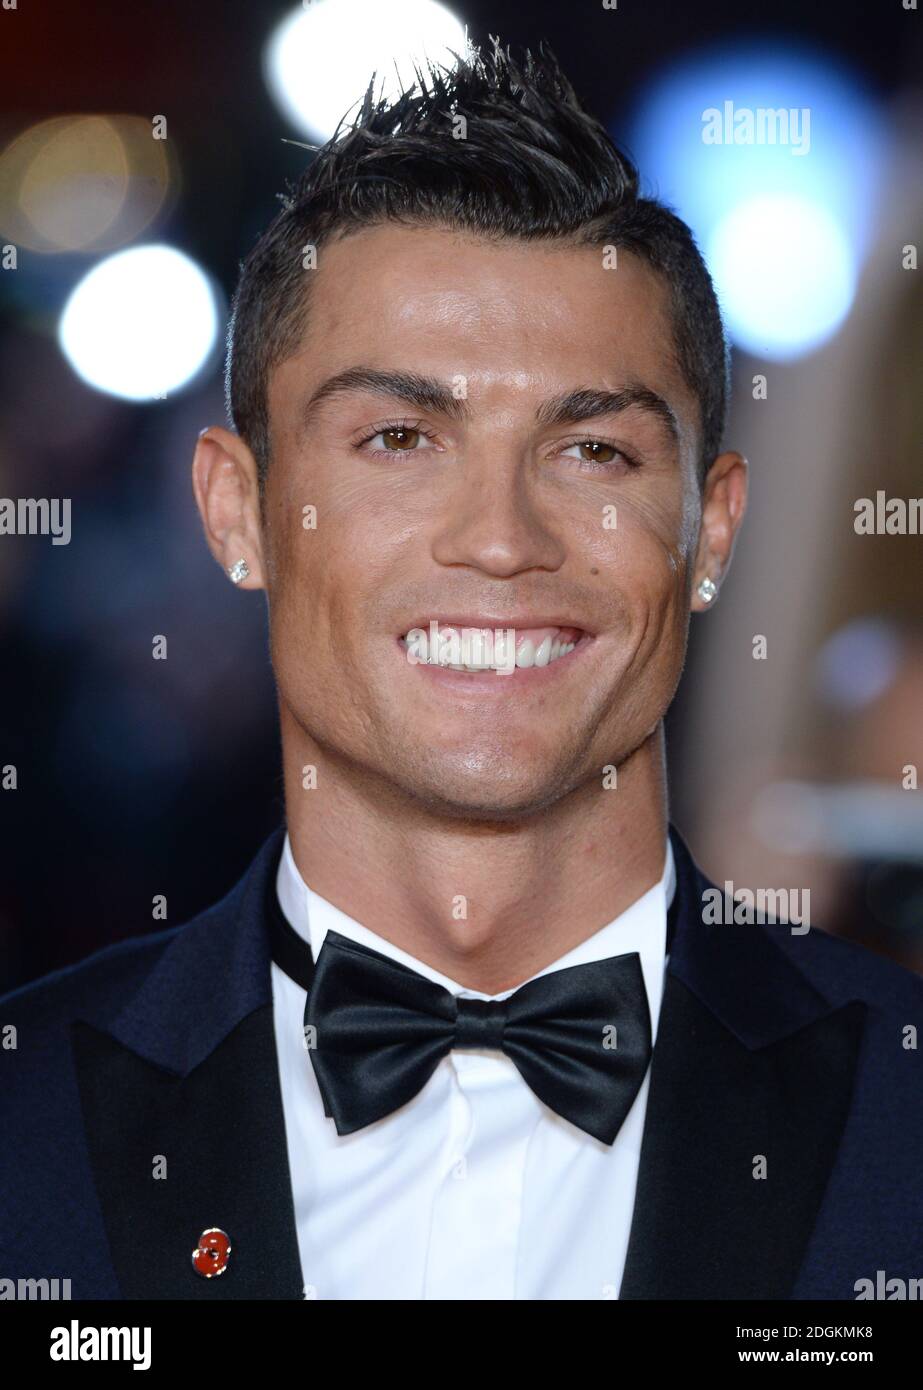 Cristiano Ronaldo attending the world premiere of Ronaldo at Vue West End Cinema in Leicester Square, London. Stock Photo